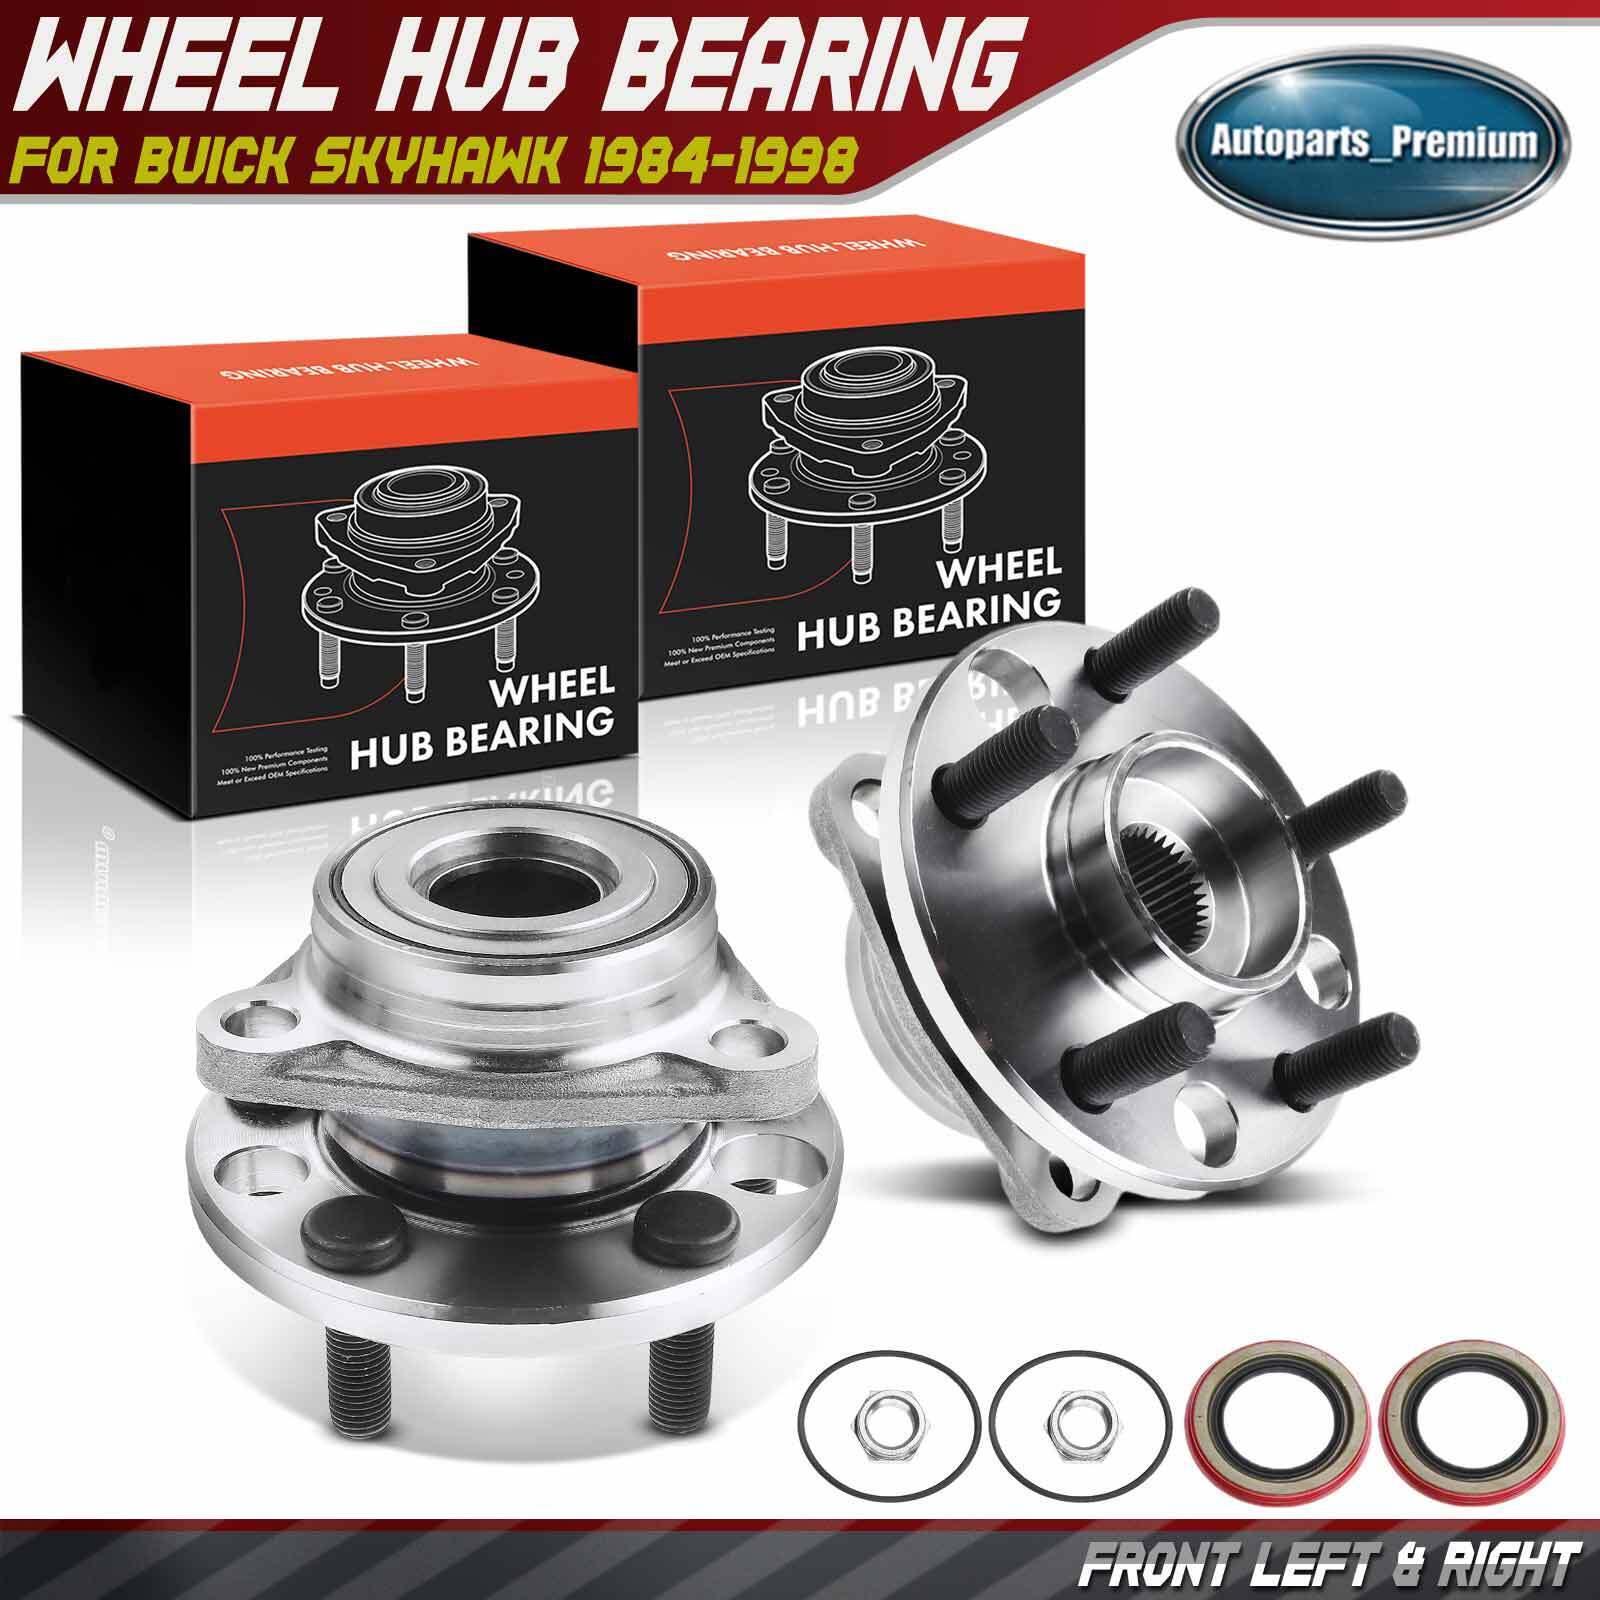 2x New Front Left & Right Wheel Bearing Hub Assembly for Buick Skyhawk 1984-1989